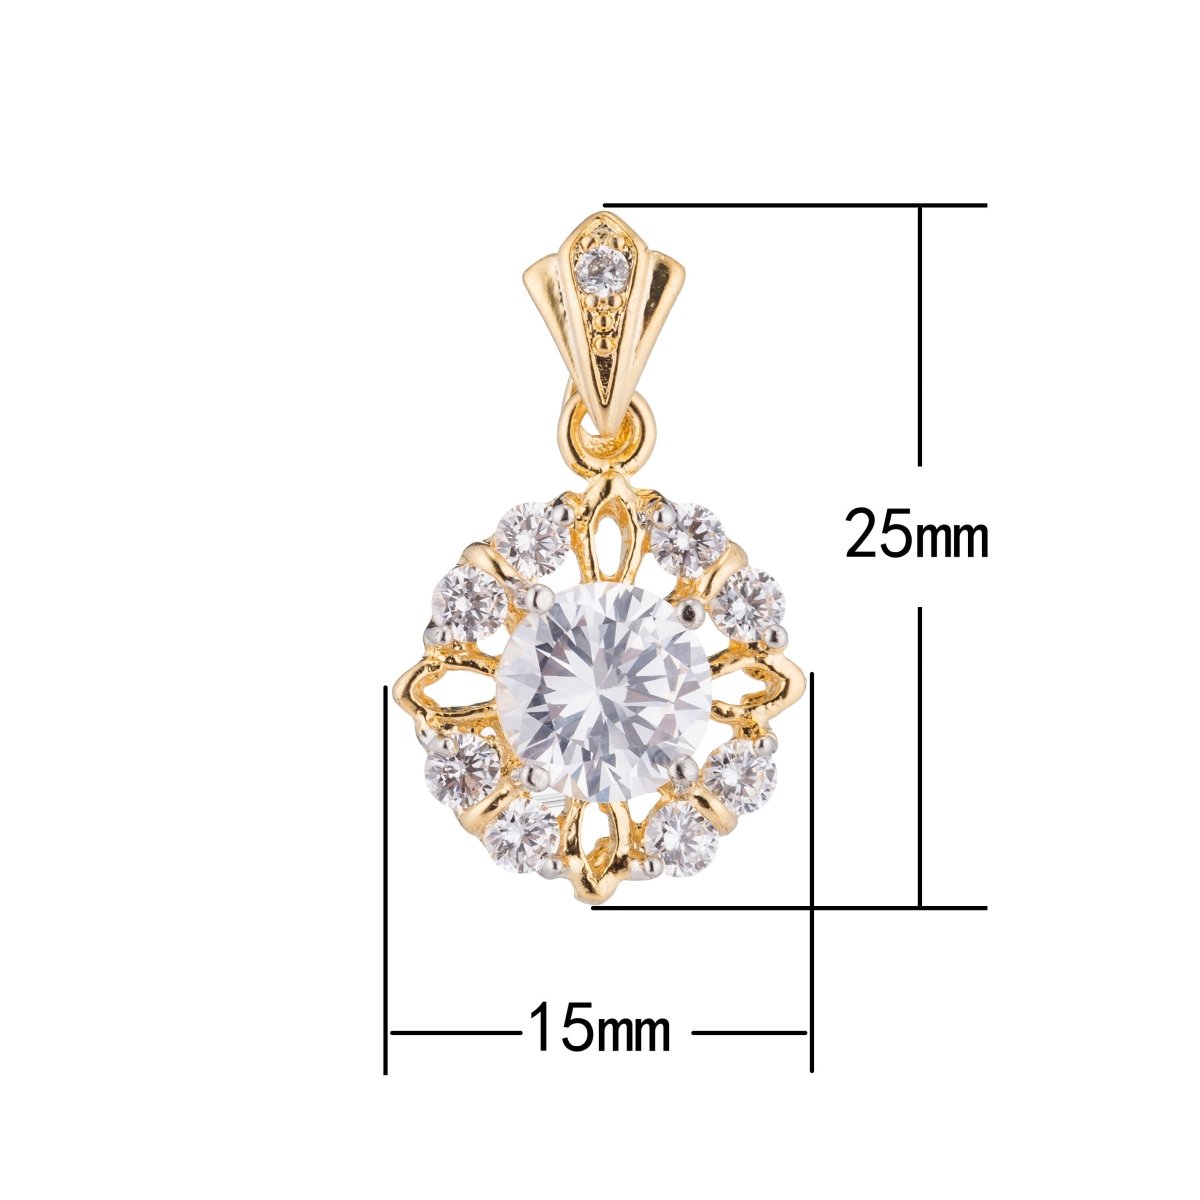 24k gold filled Gold Cute Diamond Flower, Floral, Bright, Dangle, DIY Craft Cubic Zirconia Necklace Pendant Charm Bead Bails Findings for Jewelry Making H-175 - DLUXCA